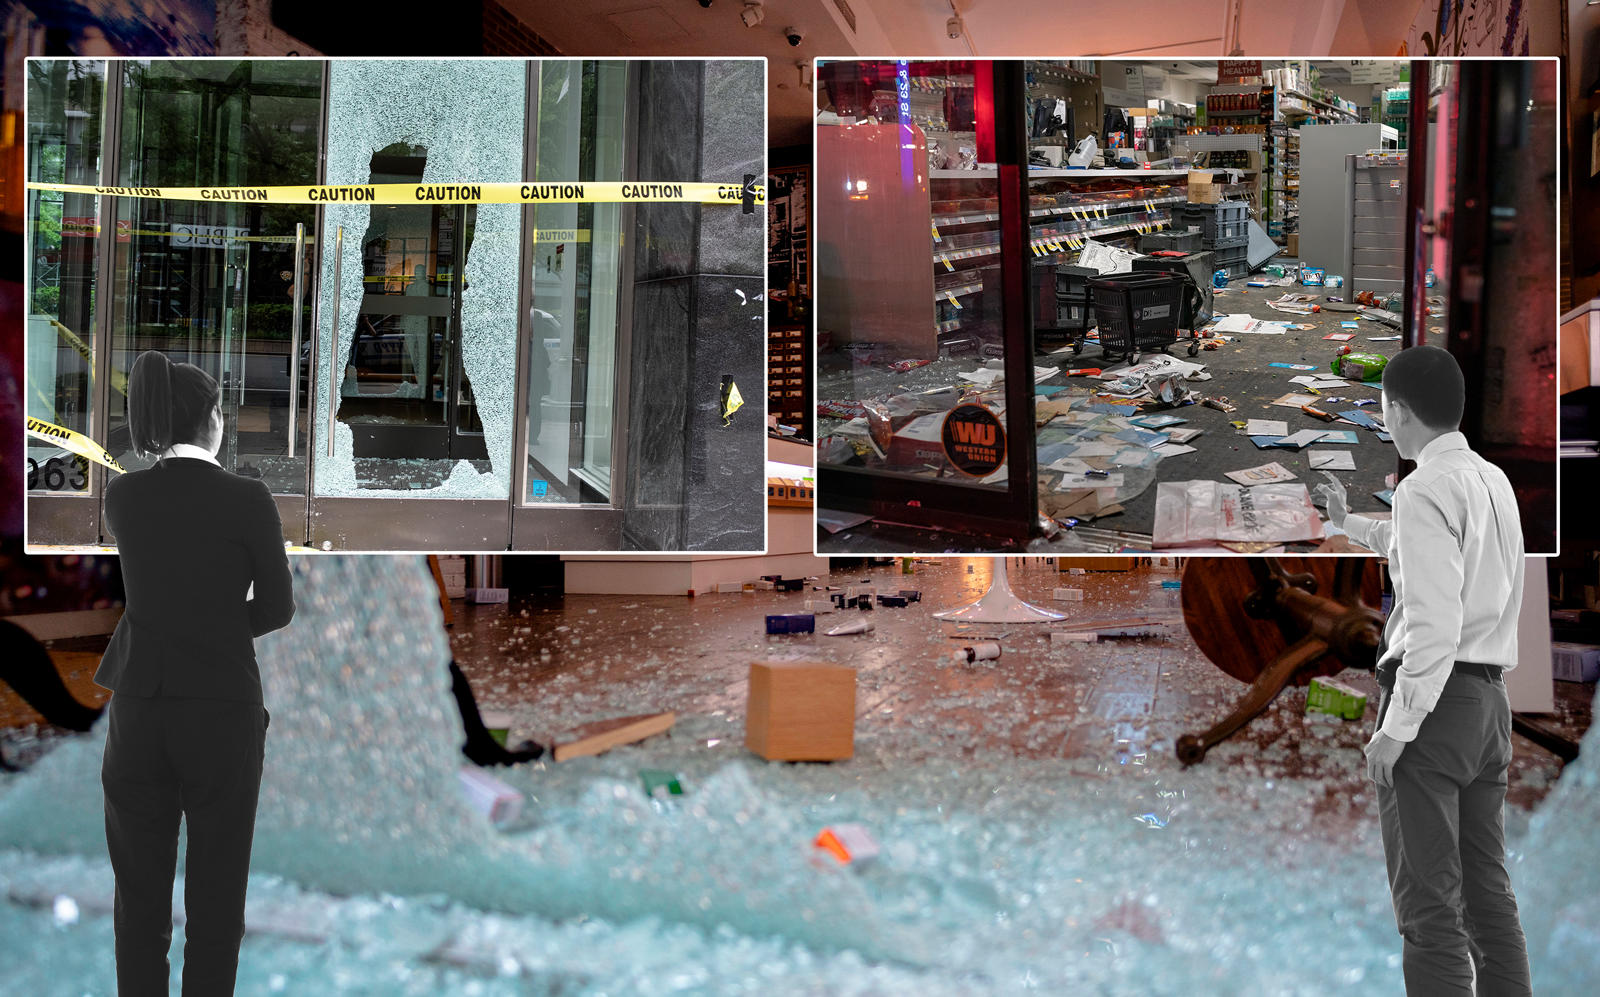 Damages to retailers from civil unrest may prove more manageable than the coronavirus in one respect — insurance coverage. But coverage varies widely and long-term implications for the industry remain unclear. (Getty)